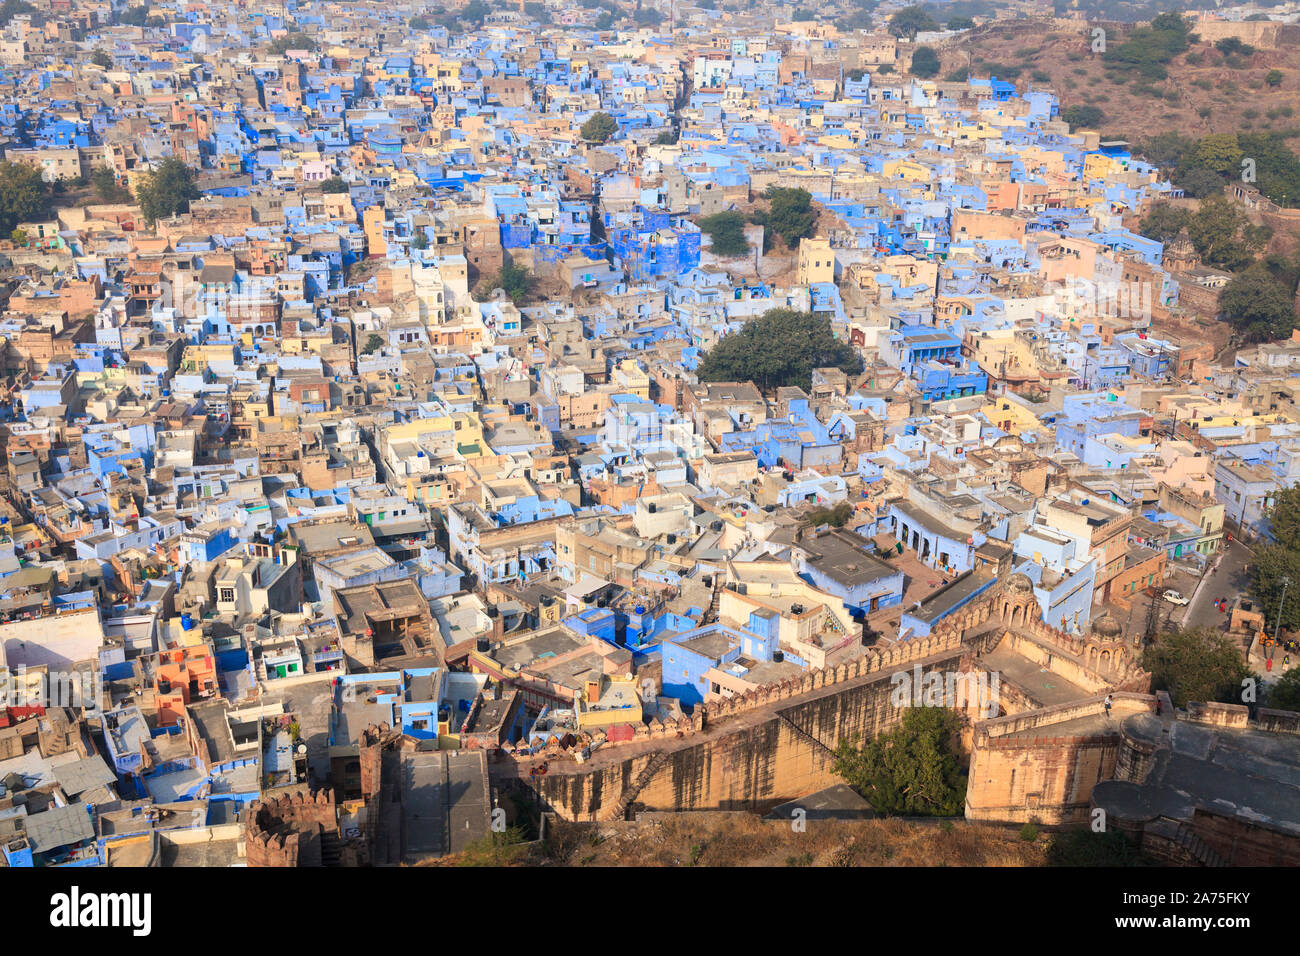 India, Rajasthan, Jodhpur, view of Old Town from Mehrangarh Fort Stock Photo